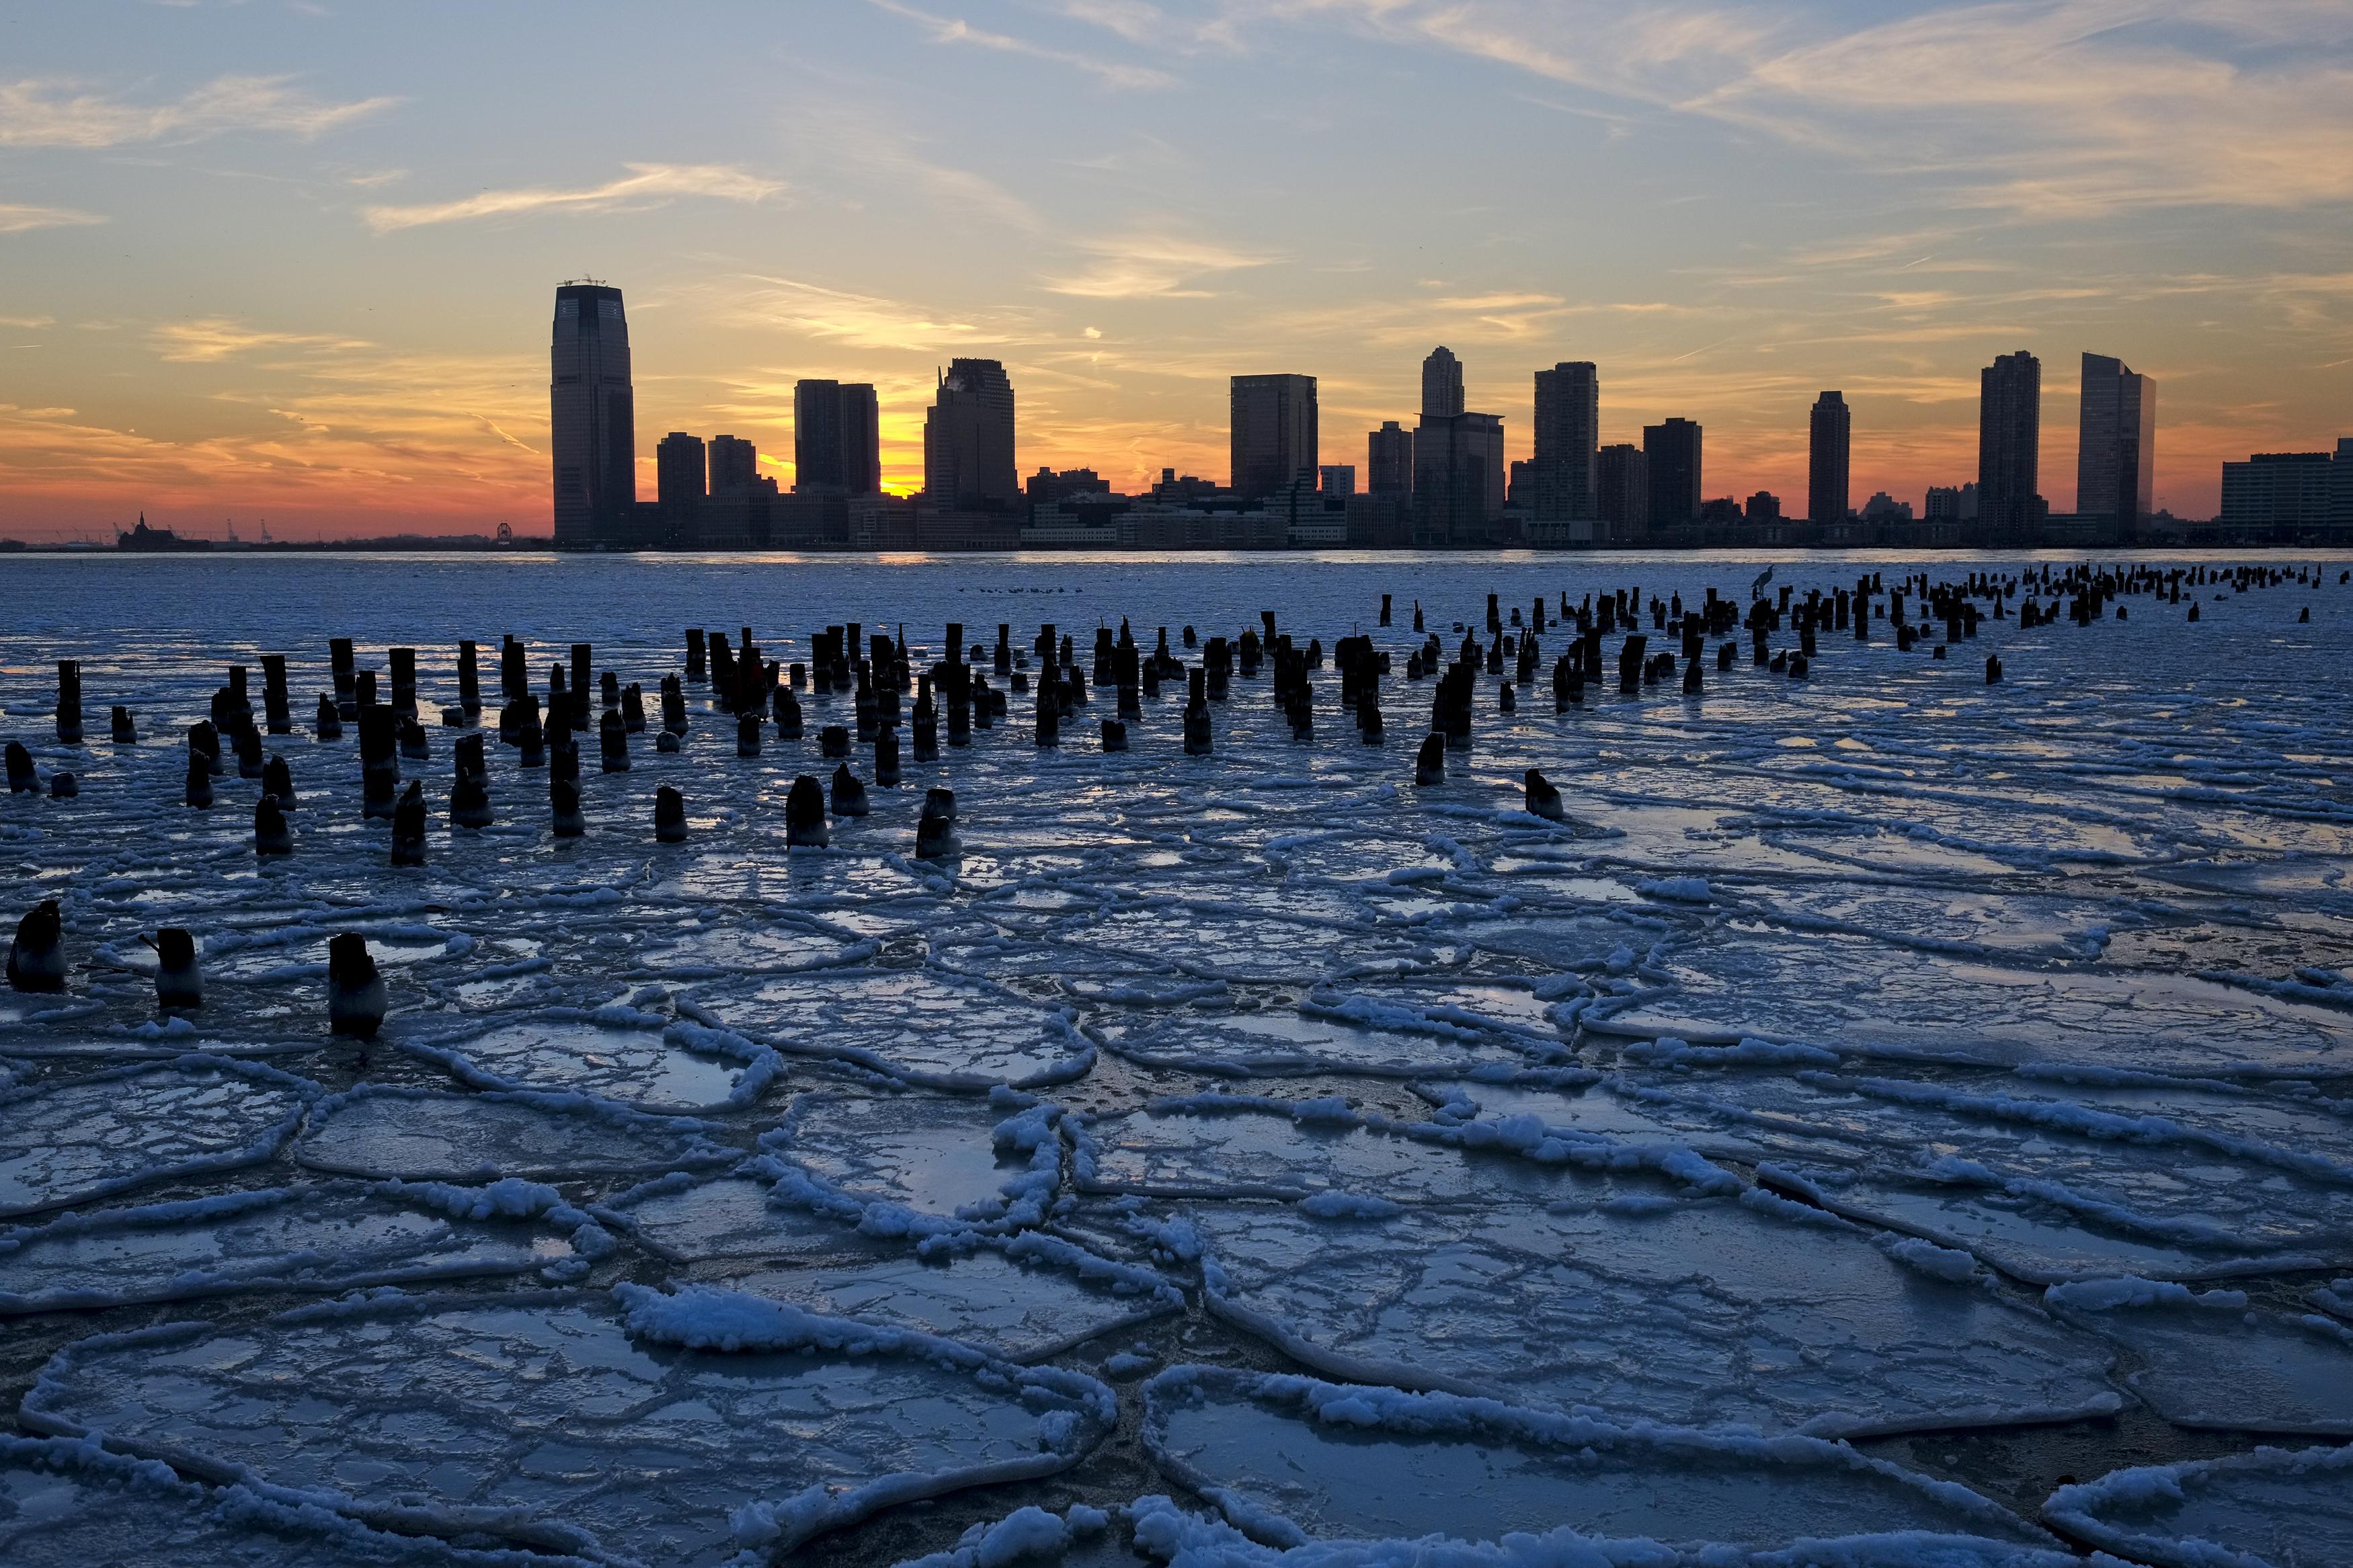 Ice floes fill the Hudson River as the New Jersey waterfront is seen during sunset in New York City. 